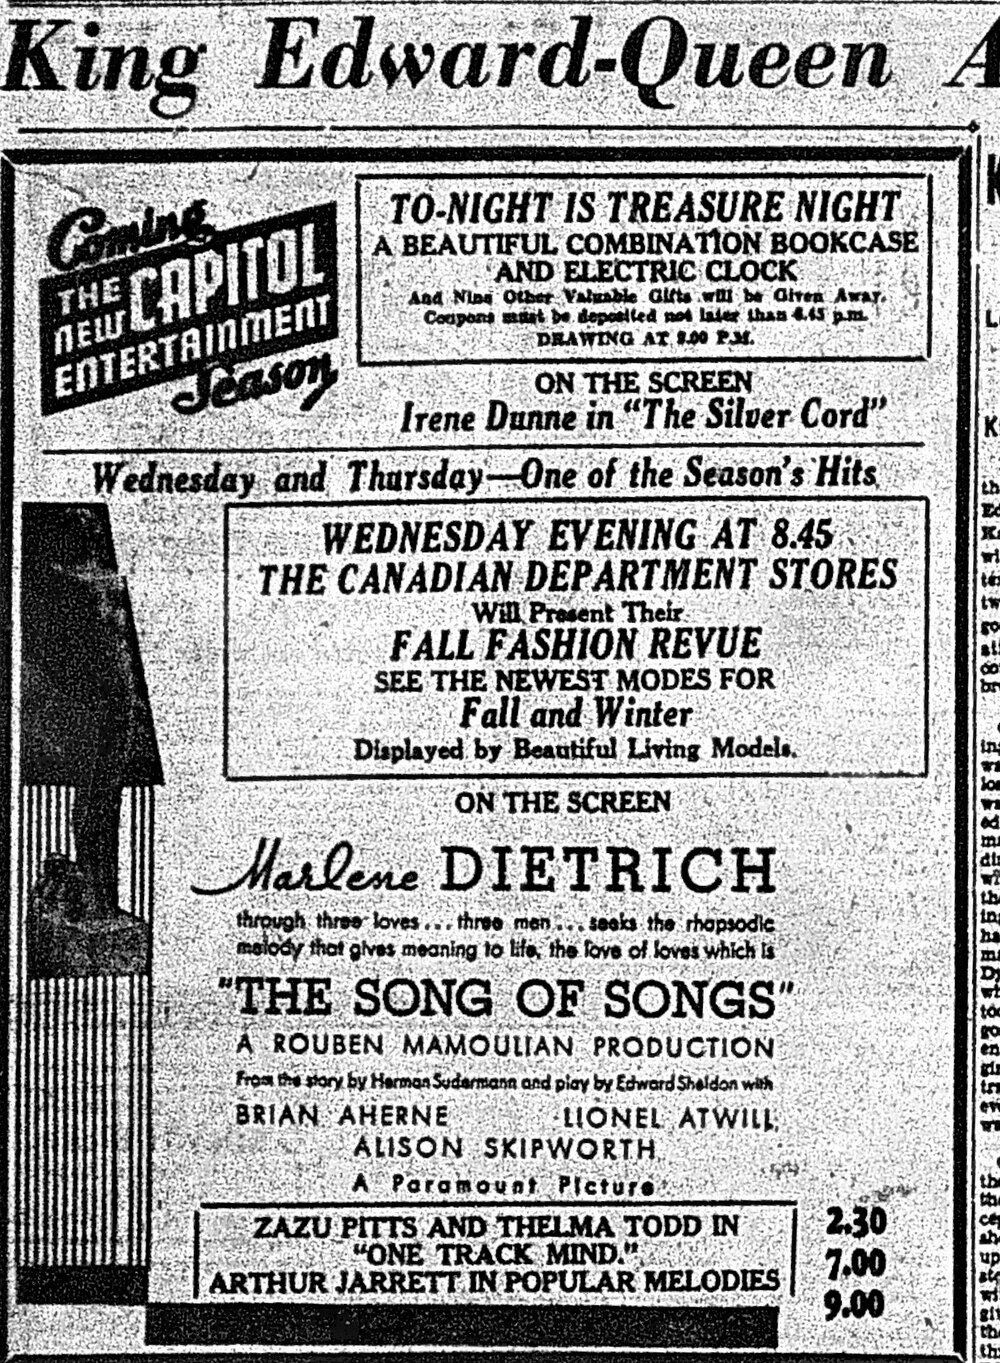 1933 Sept 28 p9 Capitol Dietrich gifts (2).JPG